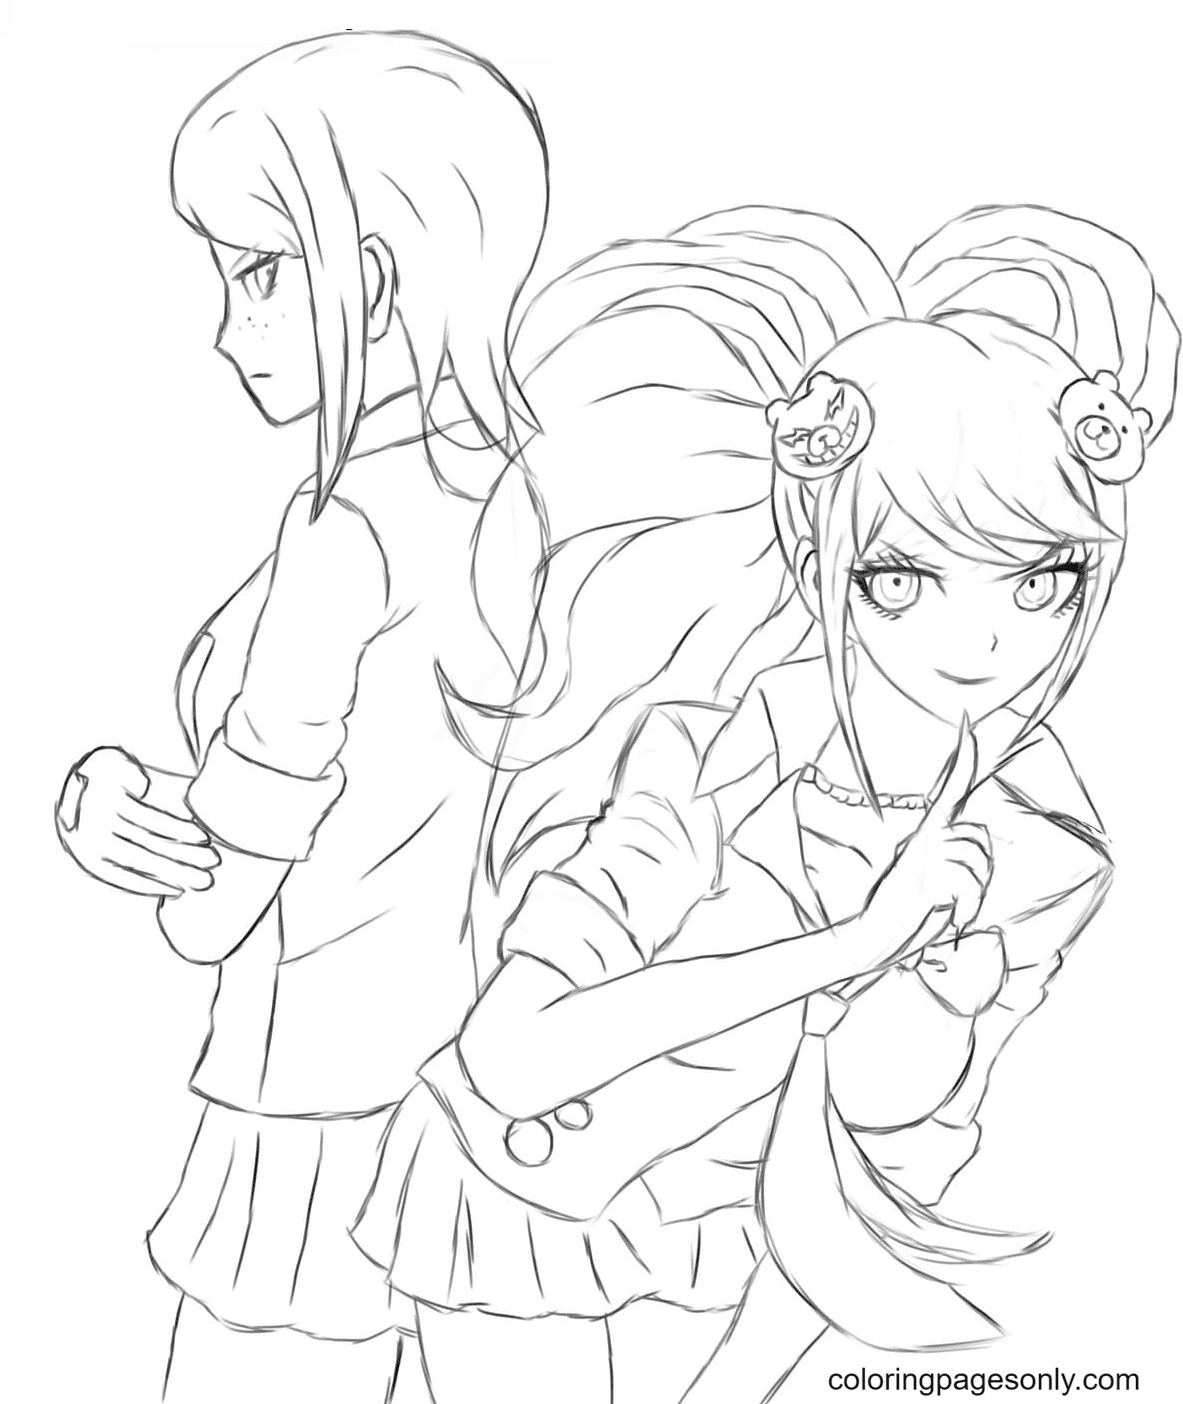 Two characters from Danganronpa Coloring Pages   Danganronpa ...